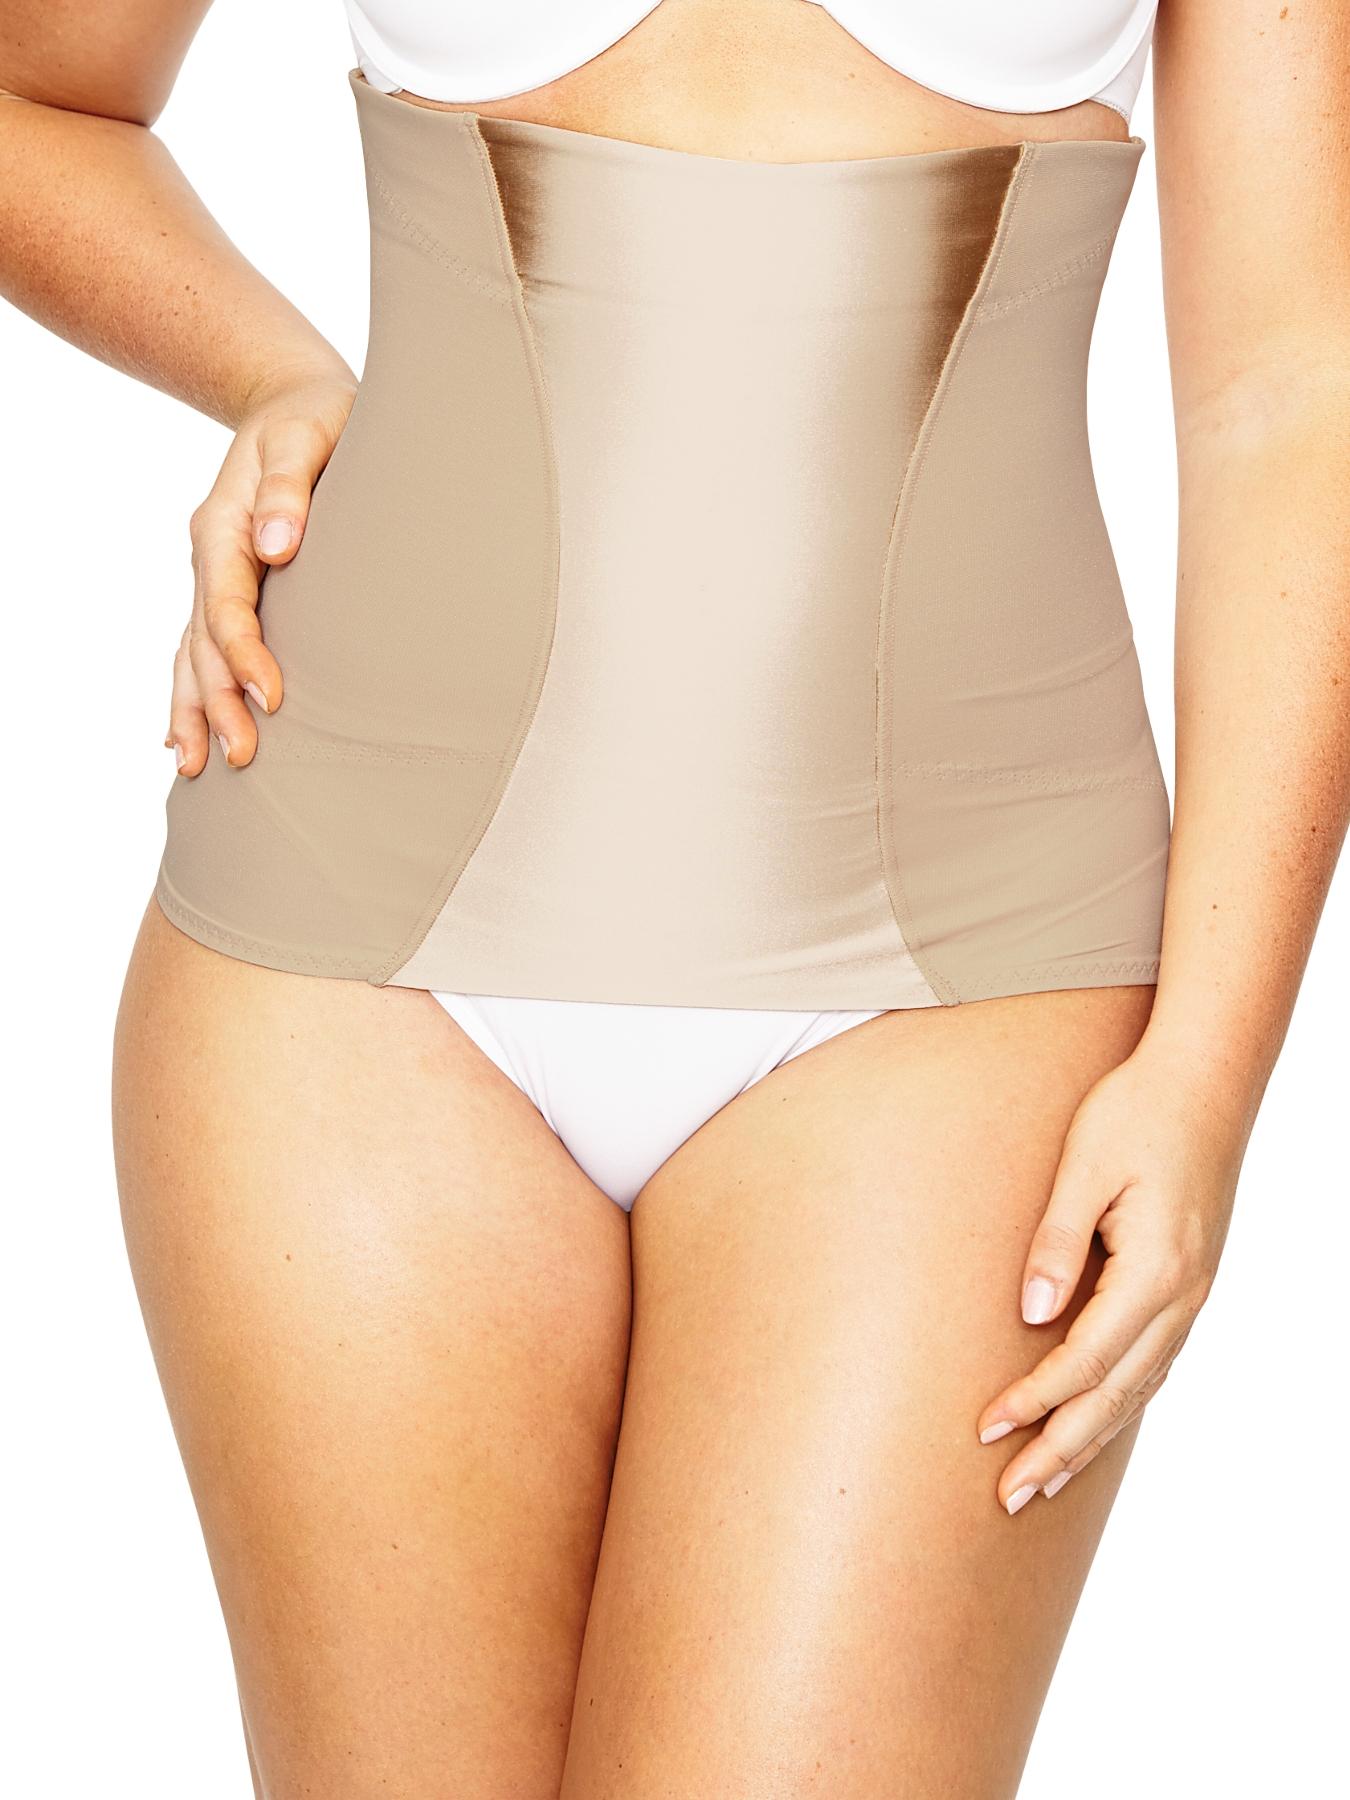 1355 - Flexees Women`s Adjusts To Me Thigh Slimmer